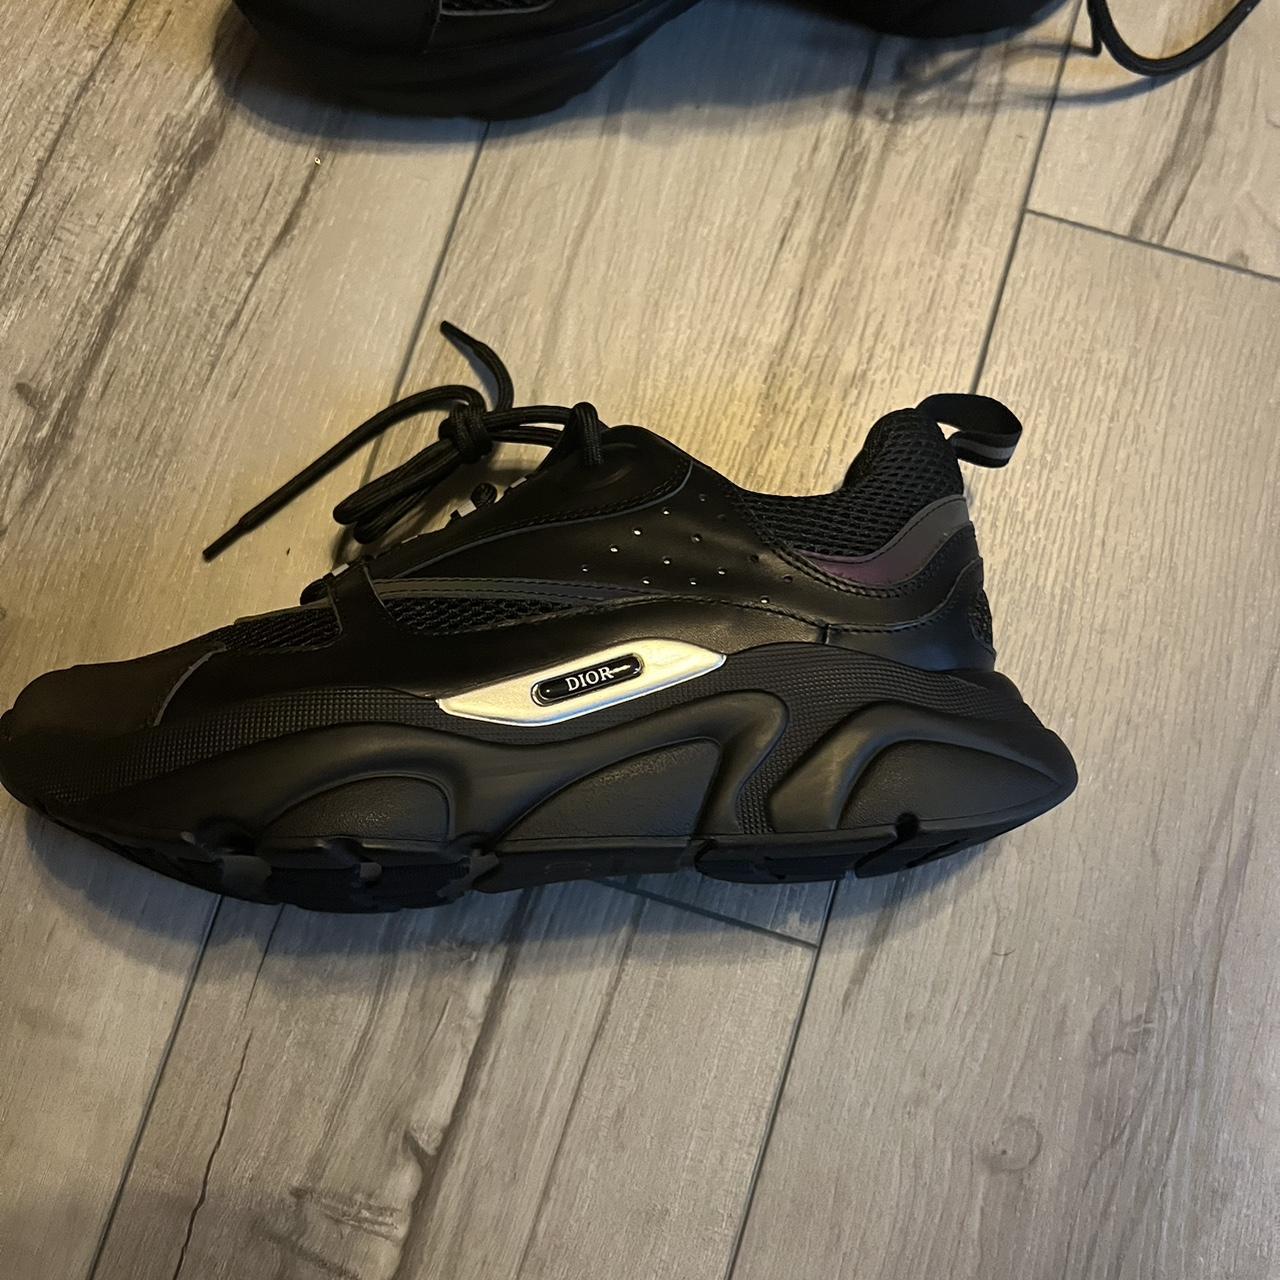 Dior, Shoes, Dior B22 Sneakers Price Is Negotiable